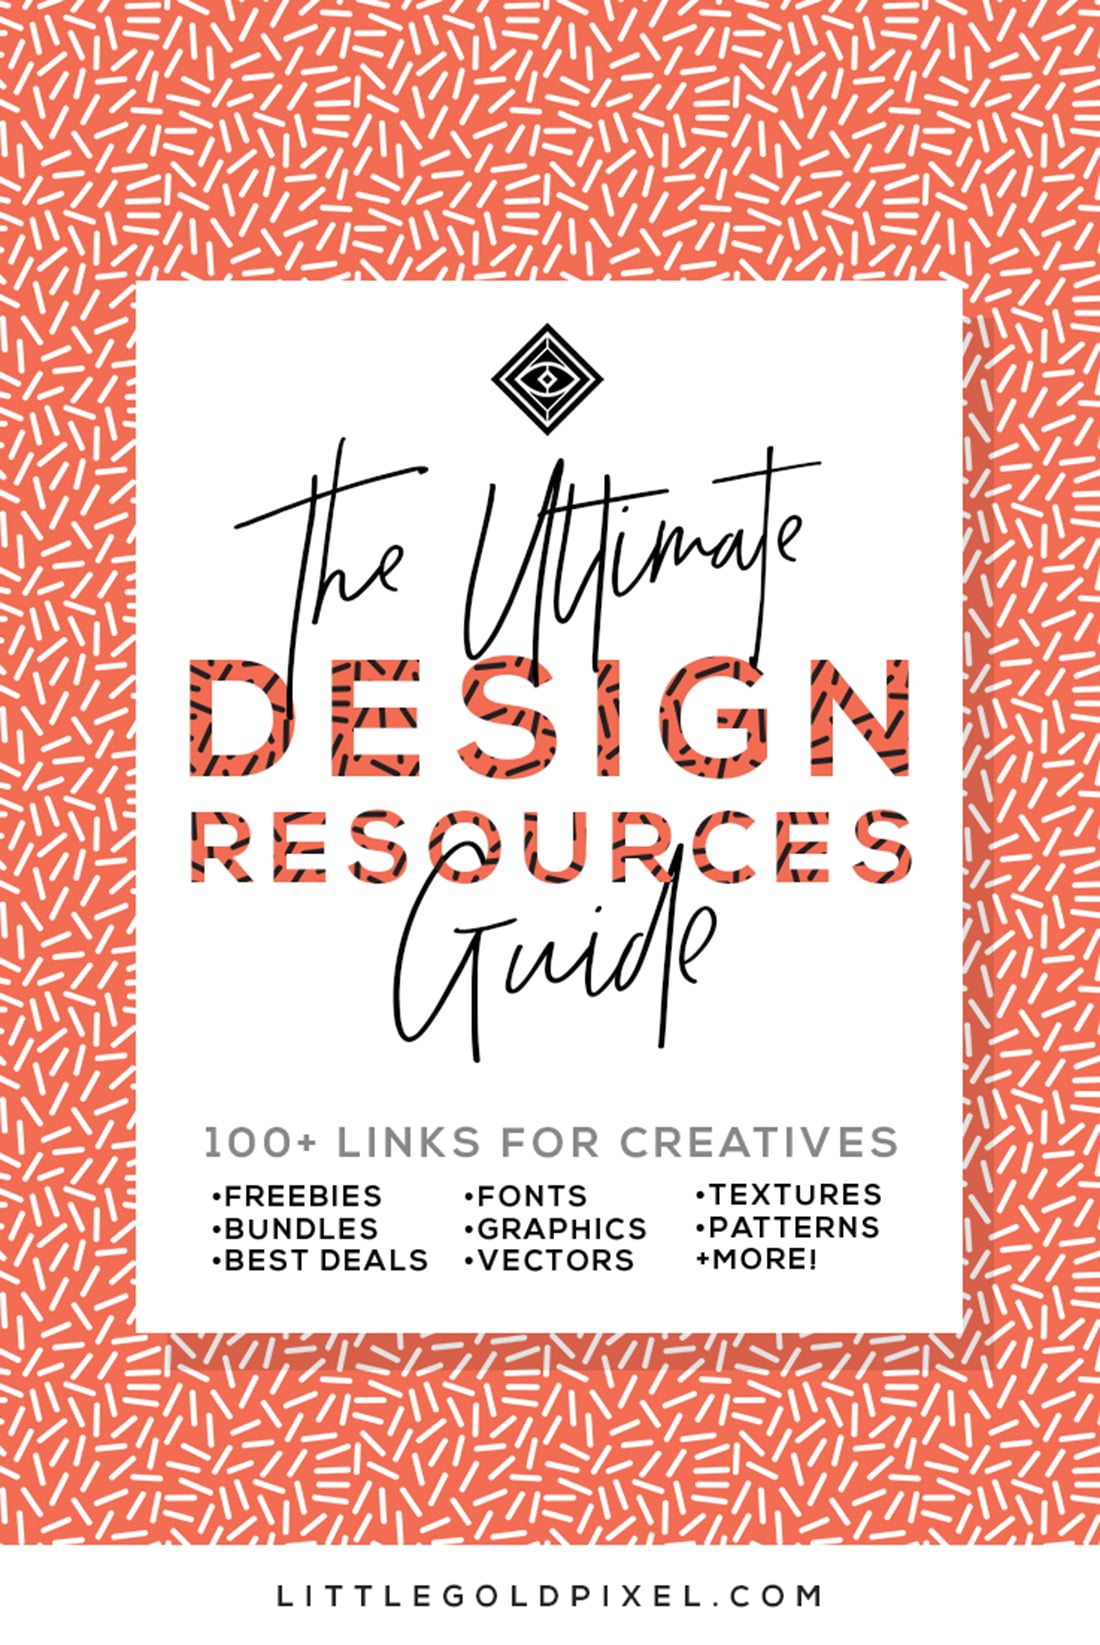 Ultimate Design Resources Guide • 100+ Links for Digital Creatives who Photoshop, Illustrator • Freebies, Bundles & Deals on Fonts, Graphics, Vectors, Textures, Patterns & More! • Click through & bookmark today!